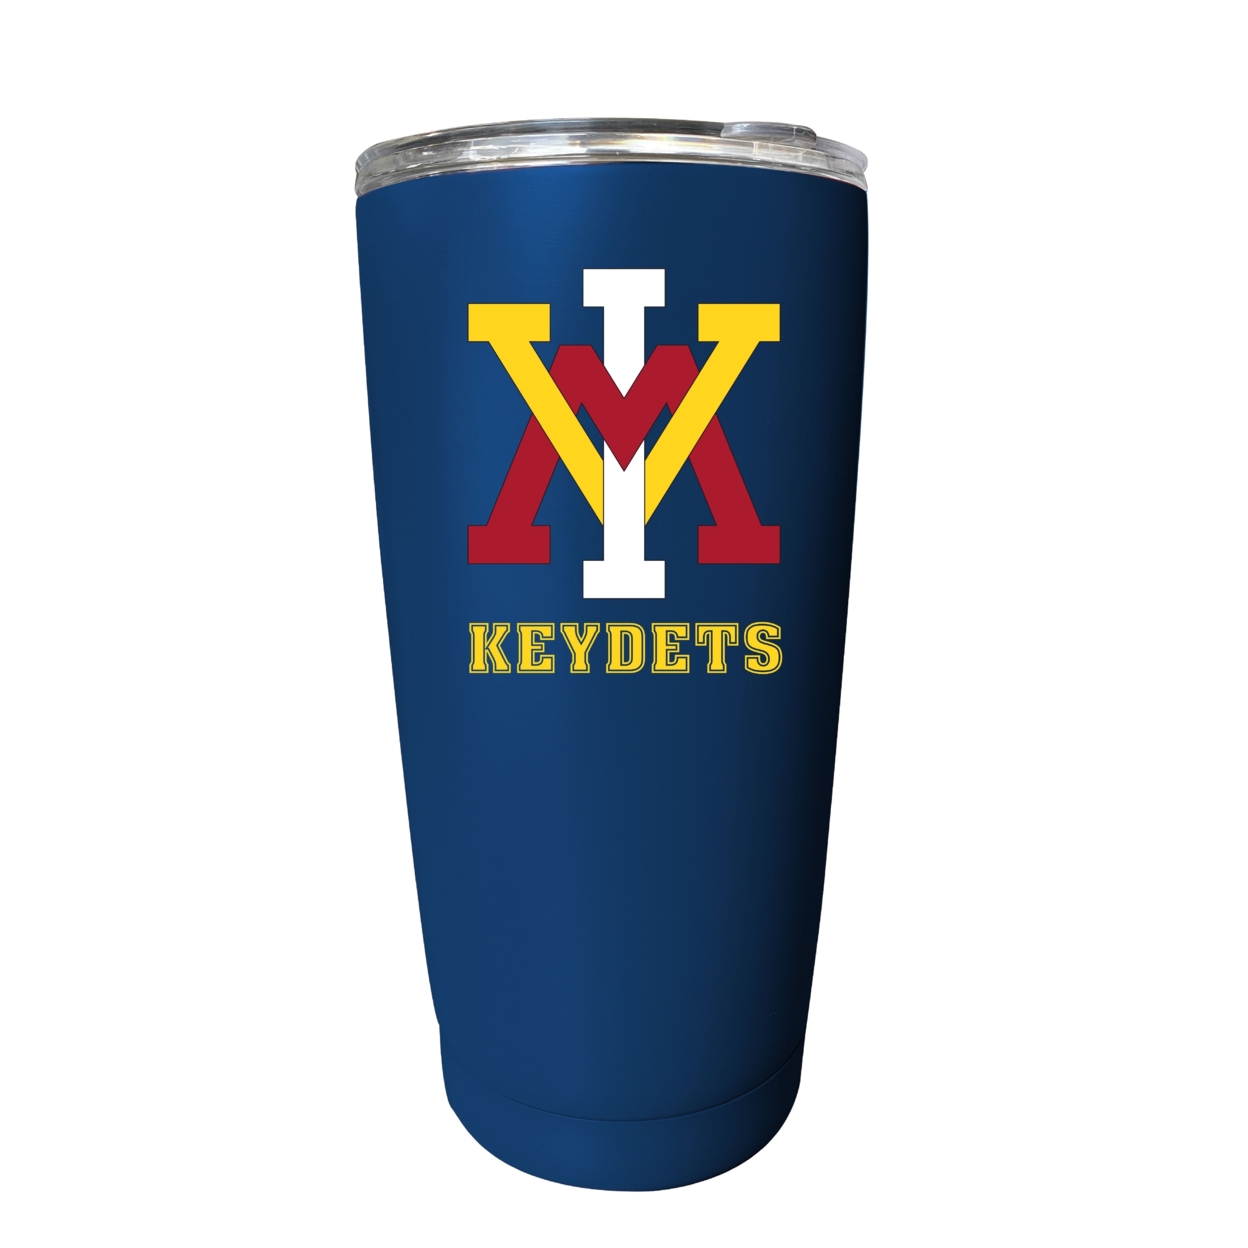 VMI Keydets 16 Oz Insulated Stainless Steel Tumbler - Choose Your Color. - Navy